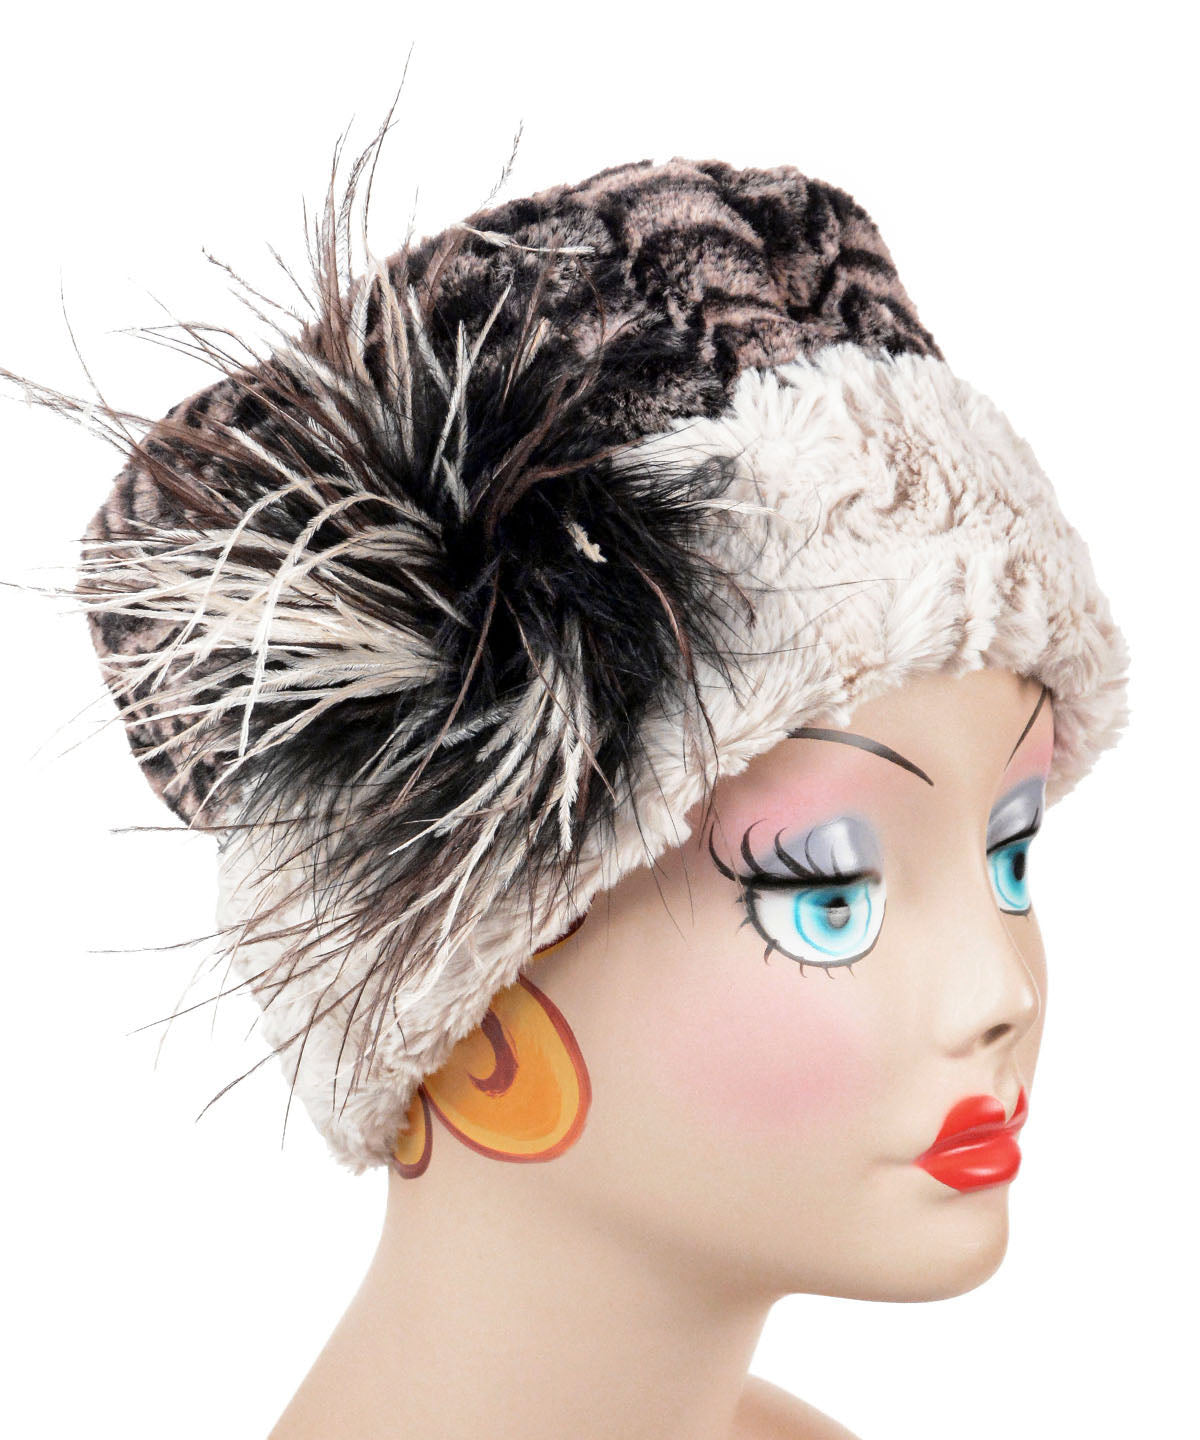 Cuffed Pillbox, Reversible two tone Hat Luxury Faux Fur in 8mm in Sepia Lined with Cuddly Fur in Sand with Cream Ostrich Feather Brooch by Pandemonium Milliner